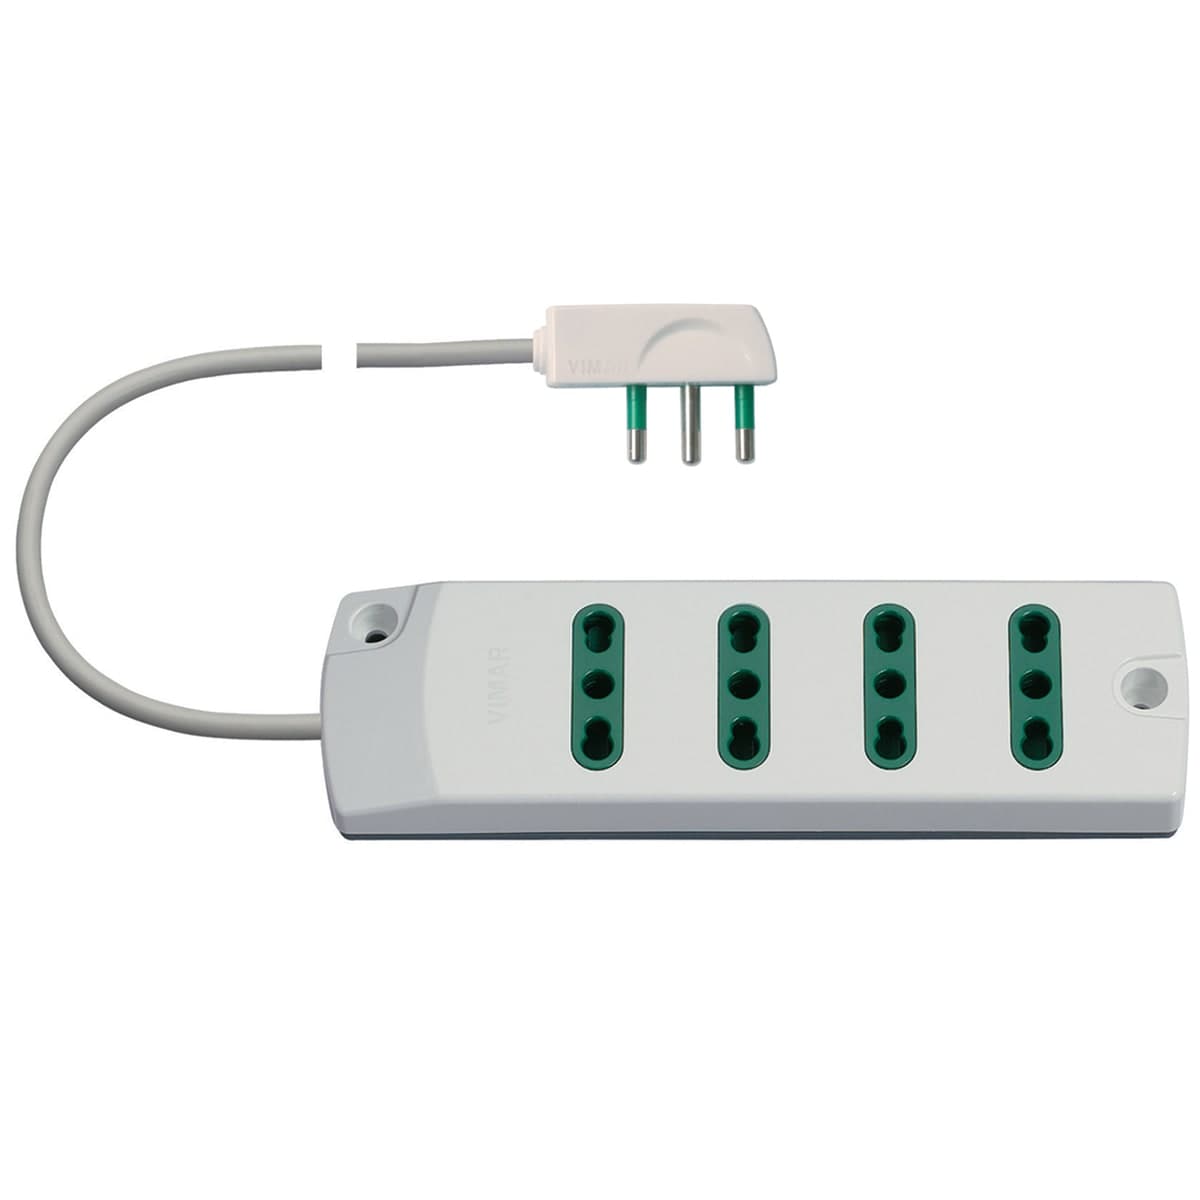 MULTISOCKET PLUG 16A 4 SOCKETS 2-PIN 10/16A CABLE 1.5MT WHITE